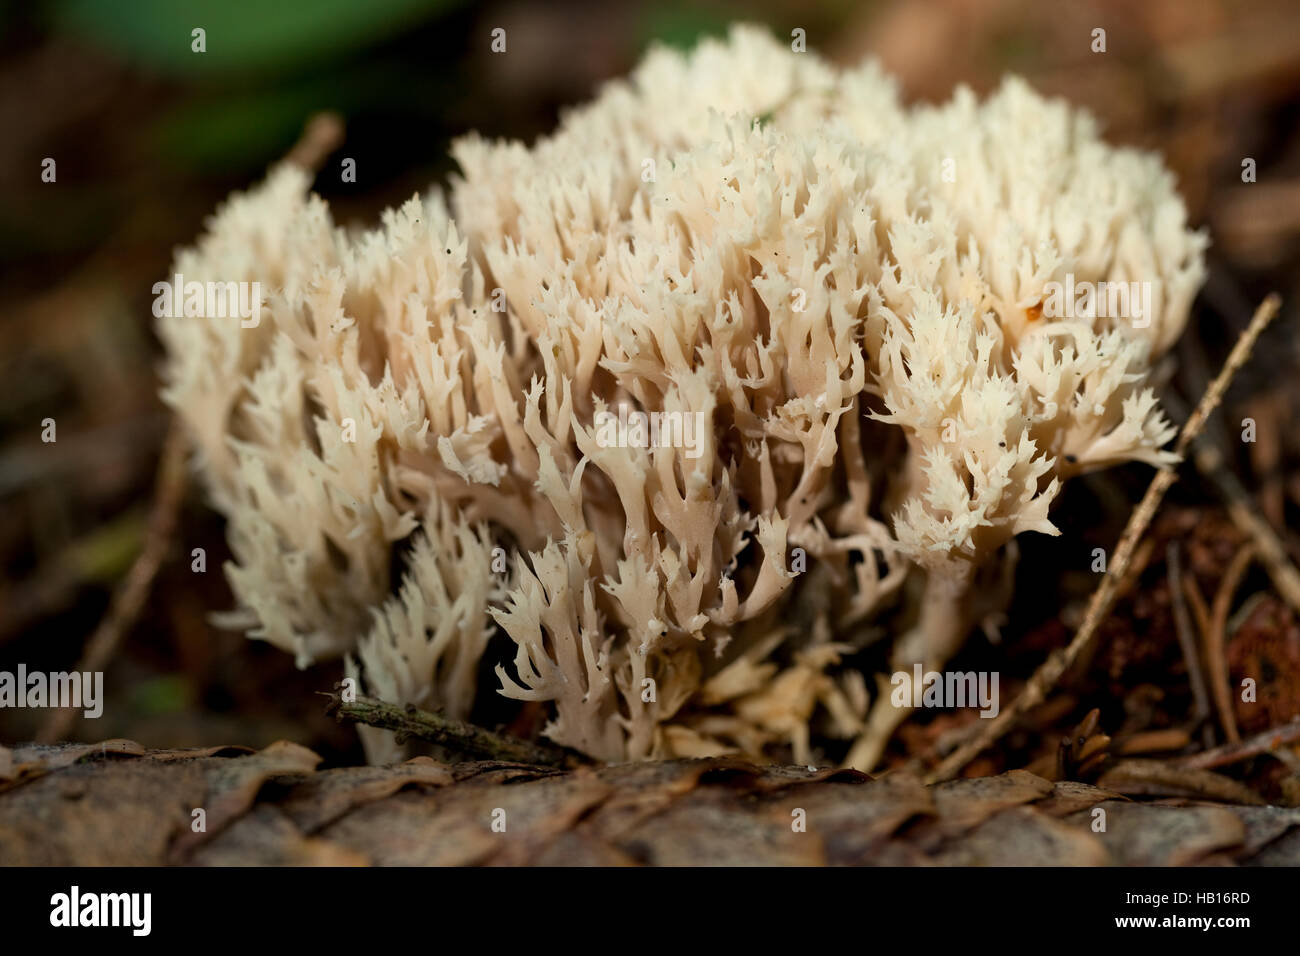 edible coral fungus(Ramaria stricta) on dry leaf Stock Photo